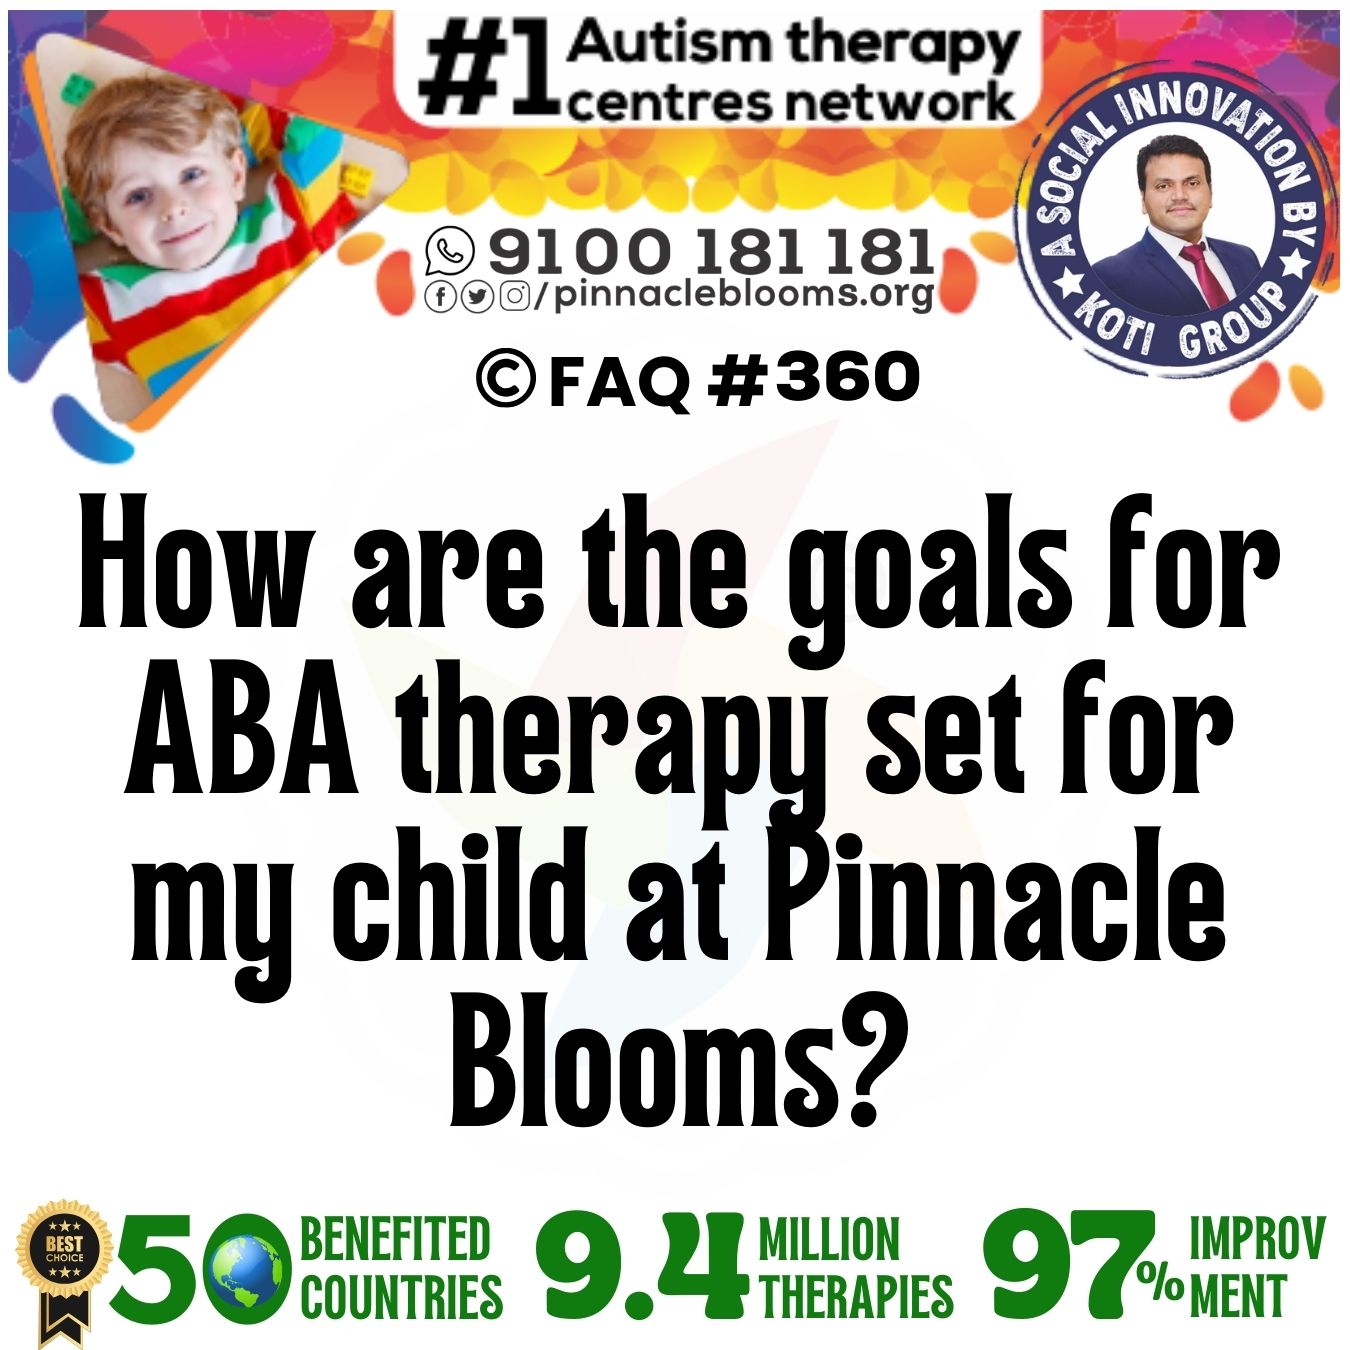 How are the goals for ABA therapy set for my child at Pinnacle Blooms?